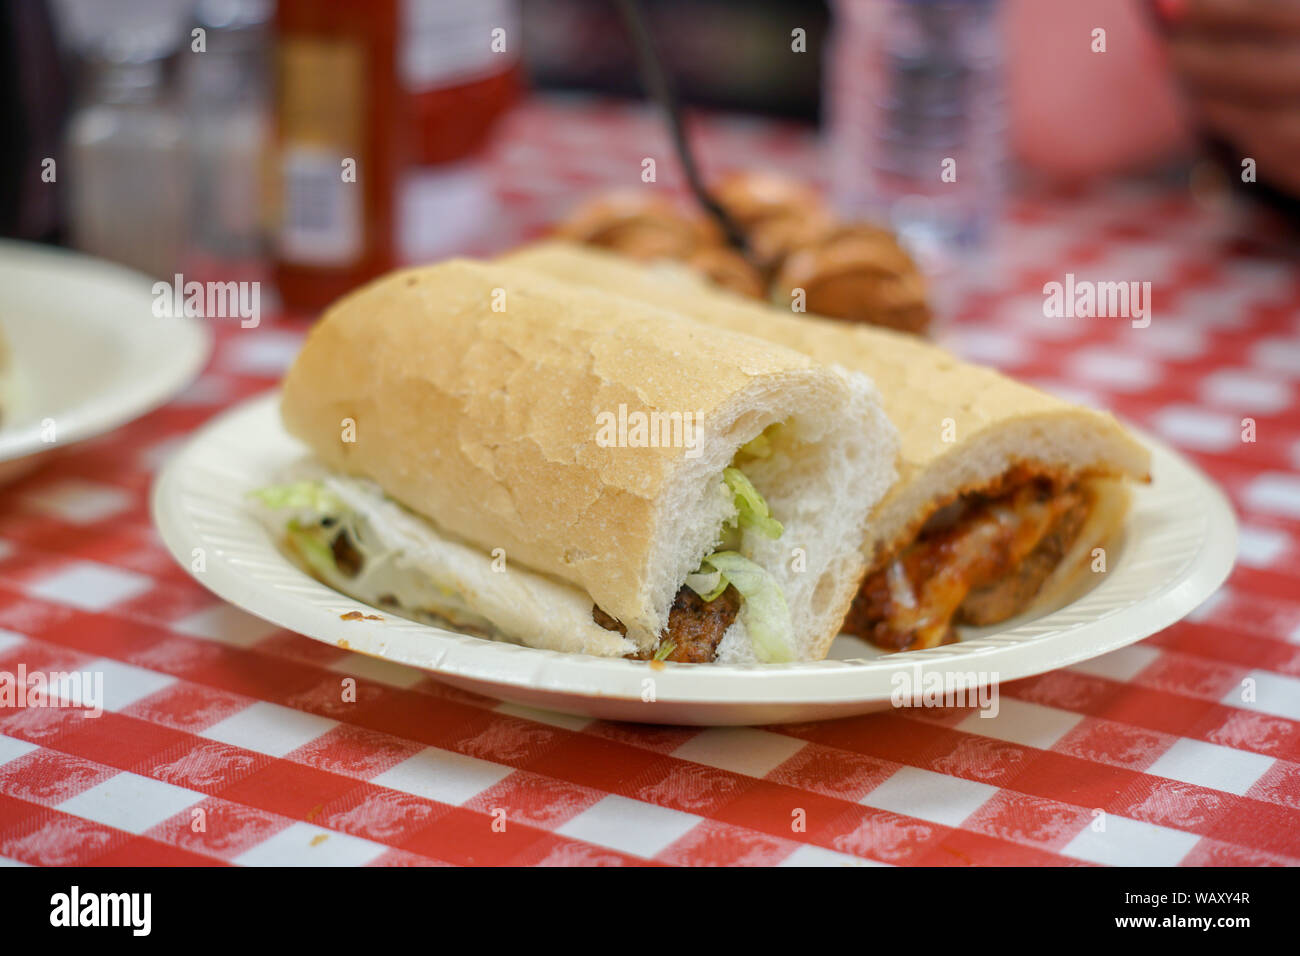 A Sausage Po' Boy Sandwich with Boudin Balls from New Orleans. Stock Photo